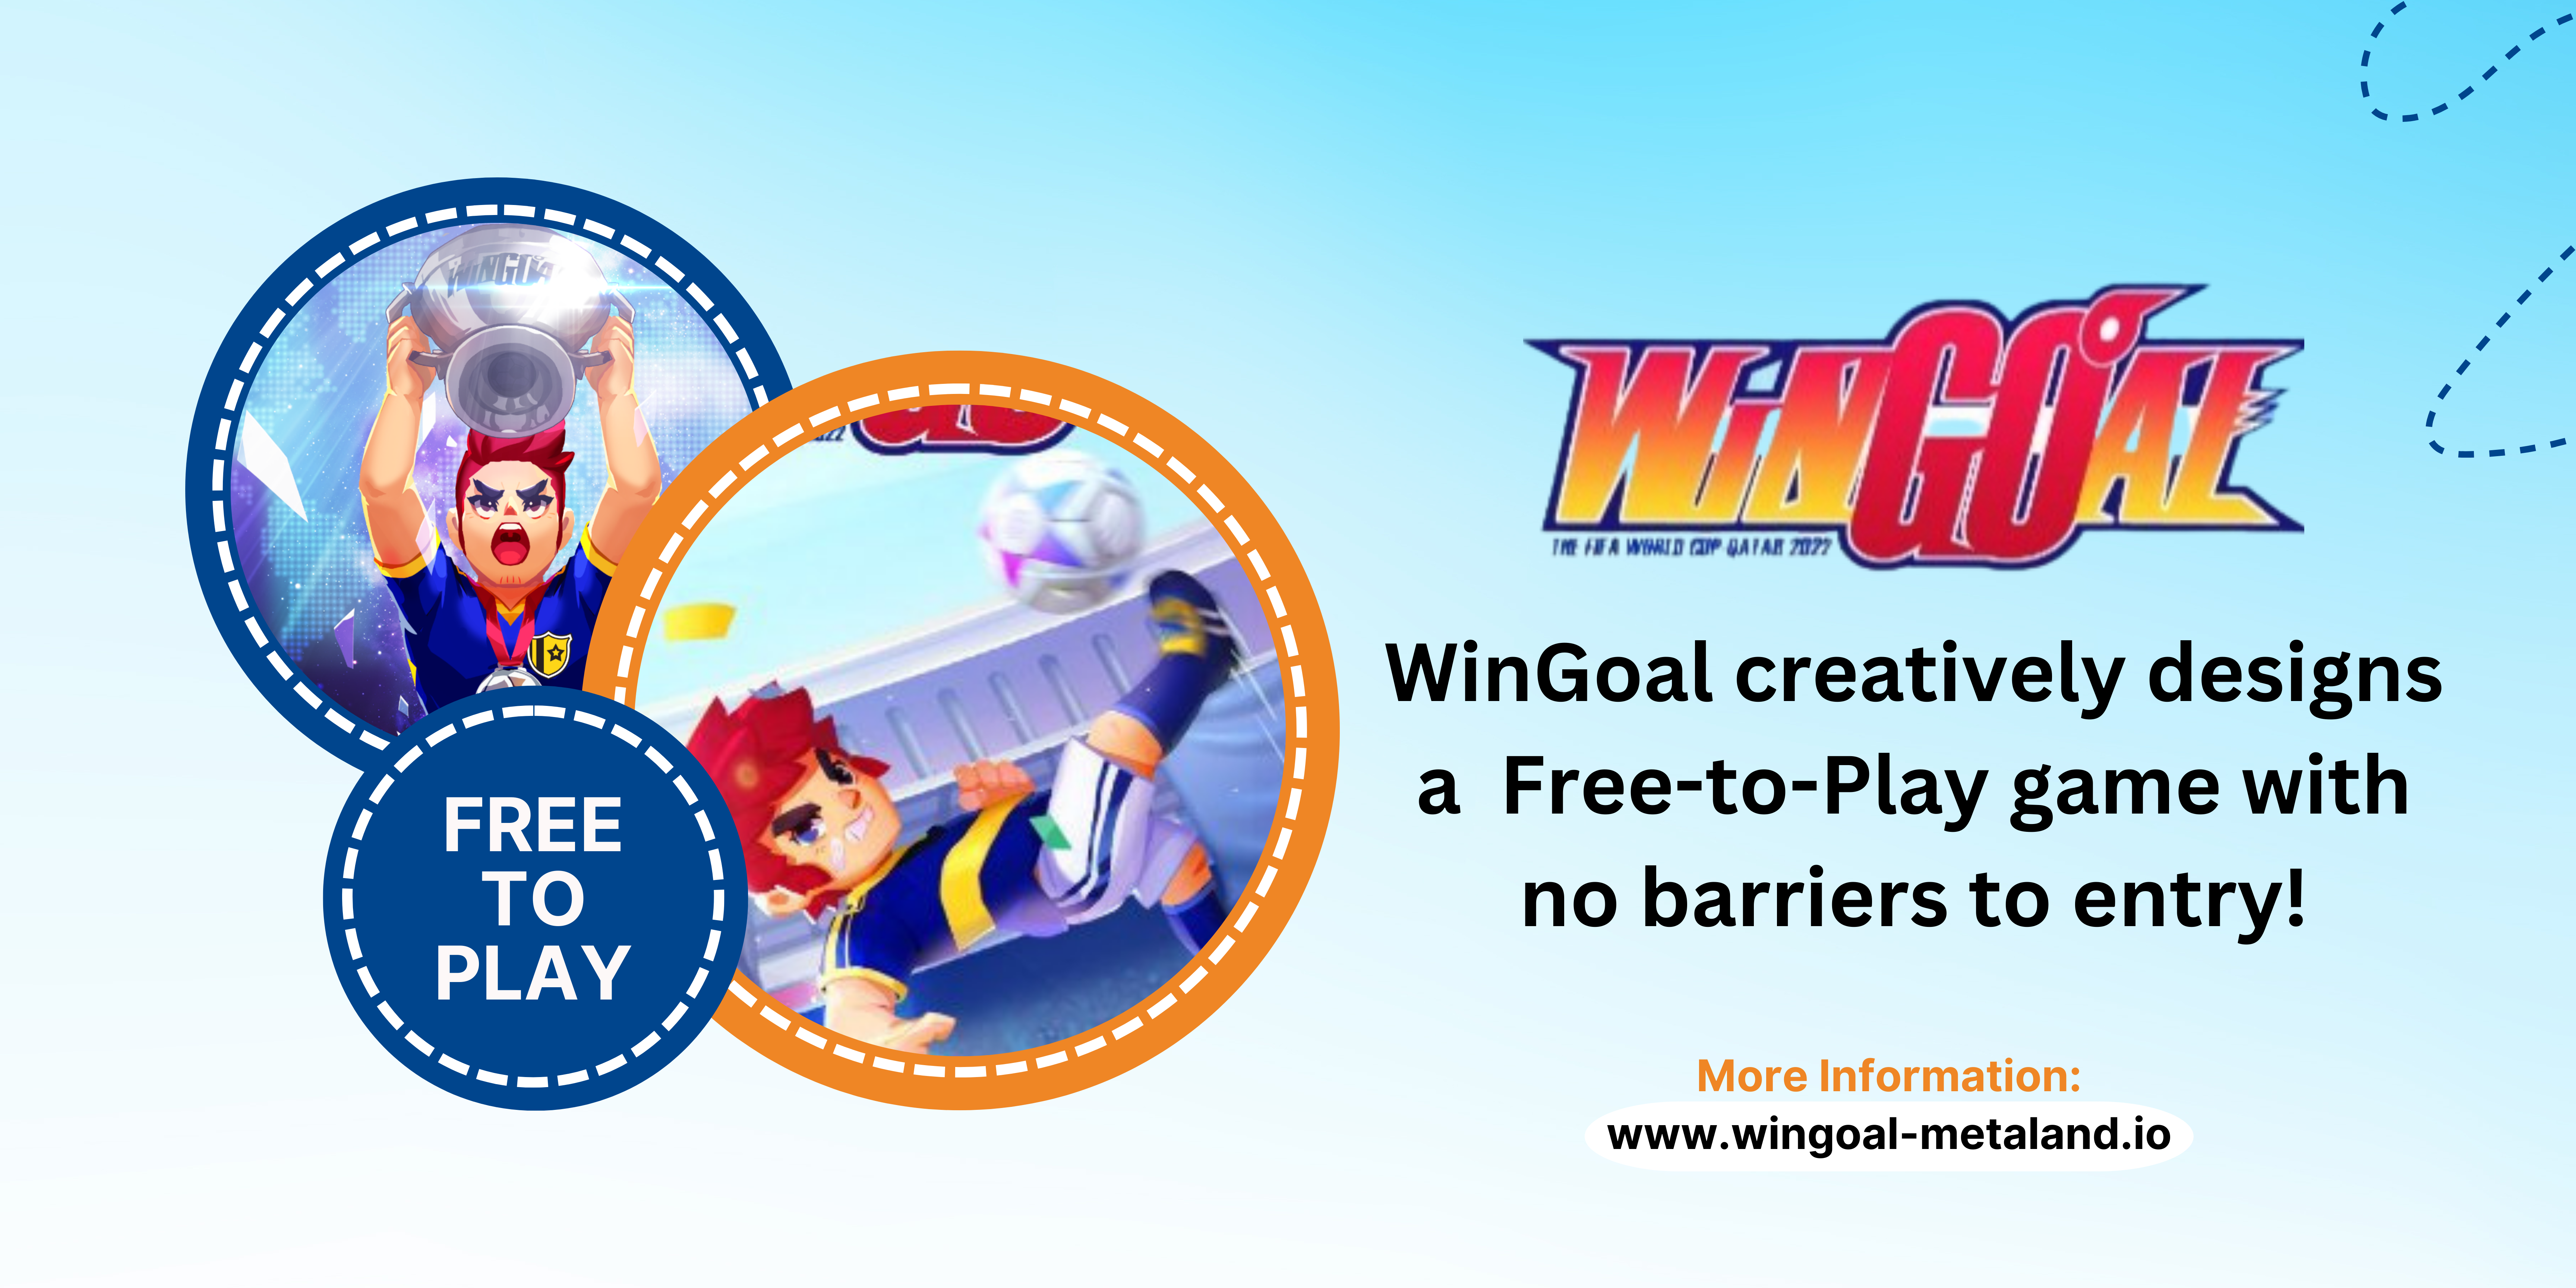 Wingoal is free to play